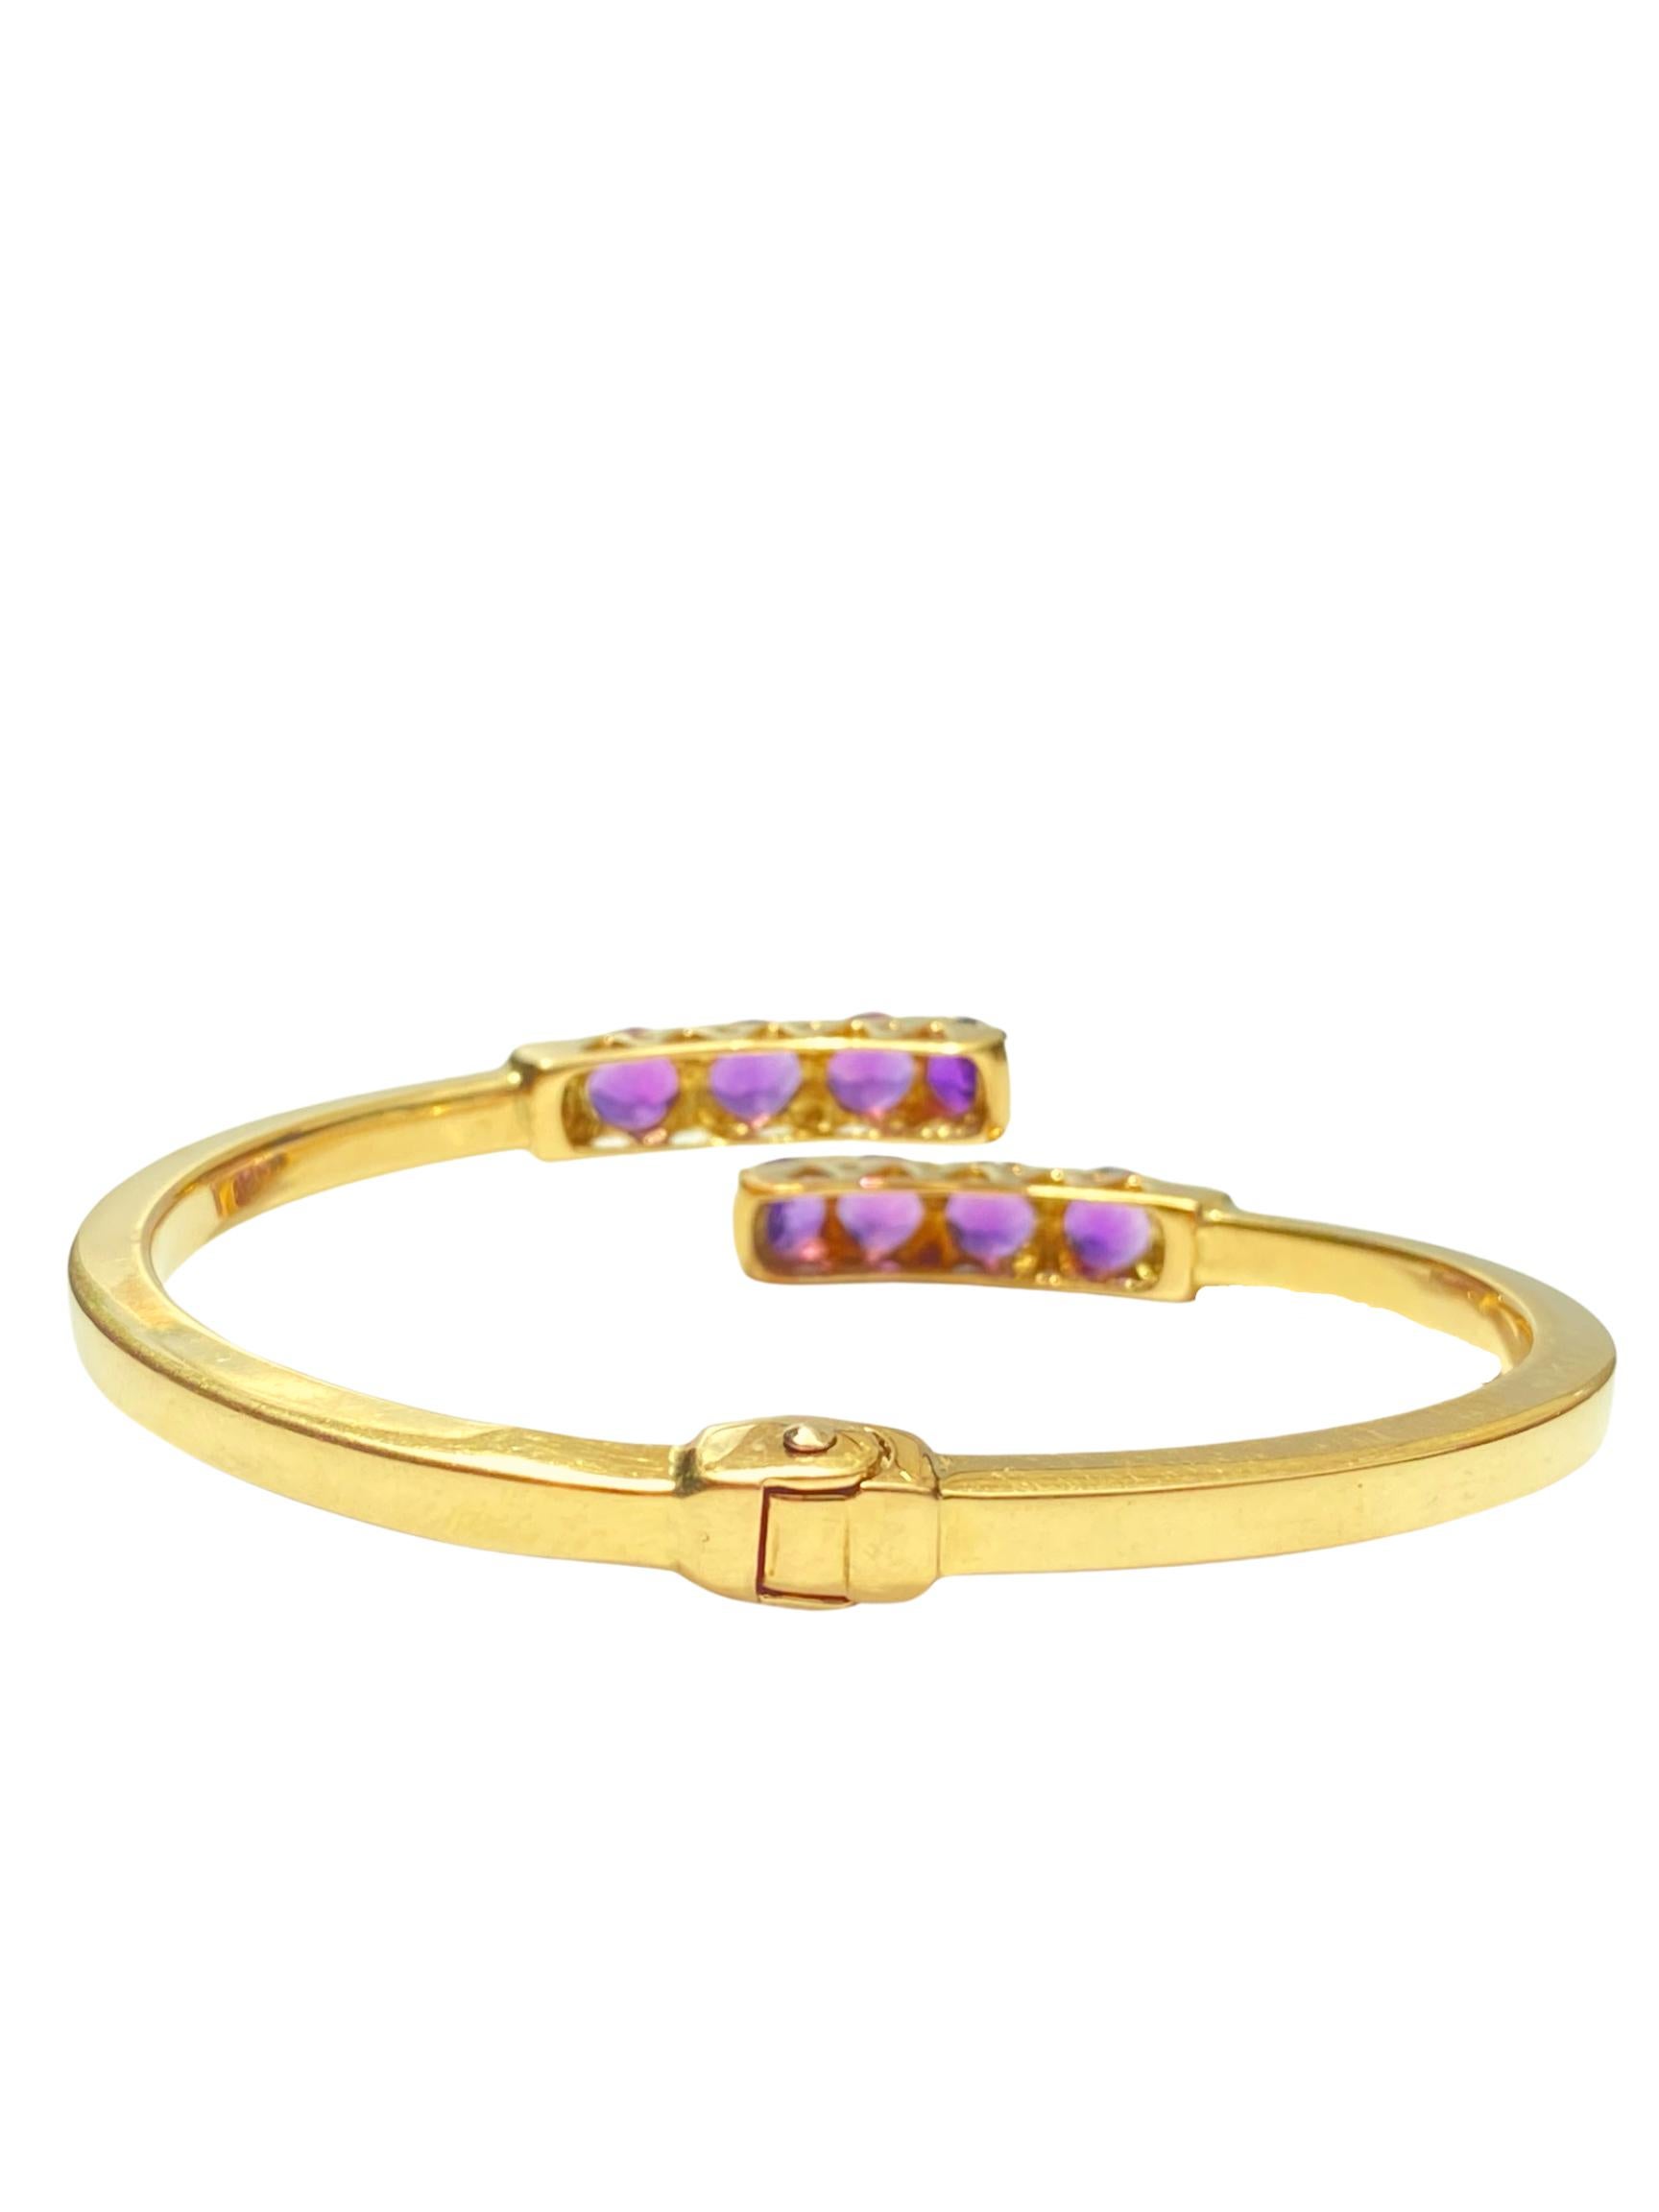 Round Cut 6.50 Carats Round-Brilliant Cut Purple Amethyst and 18k Yellow Gold Bangle For Sale